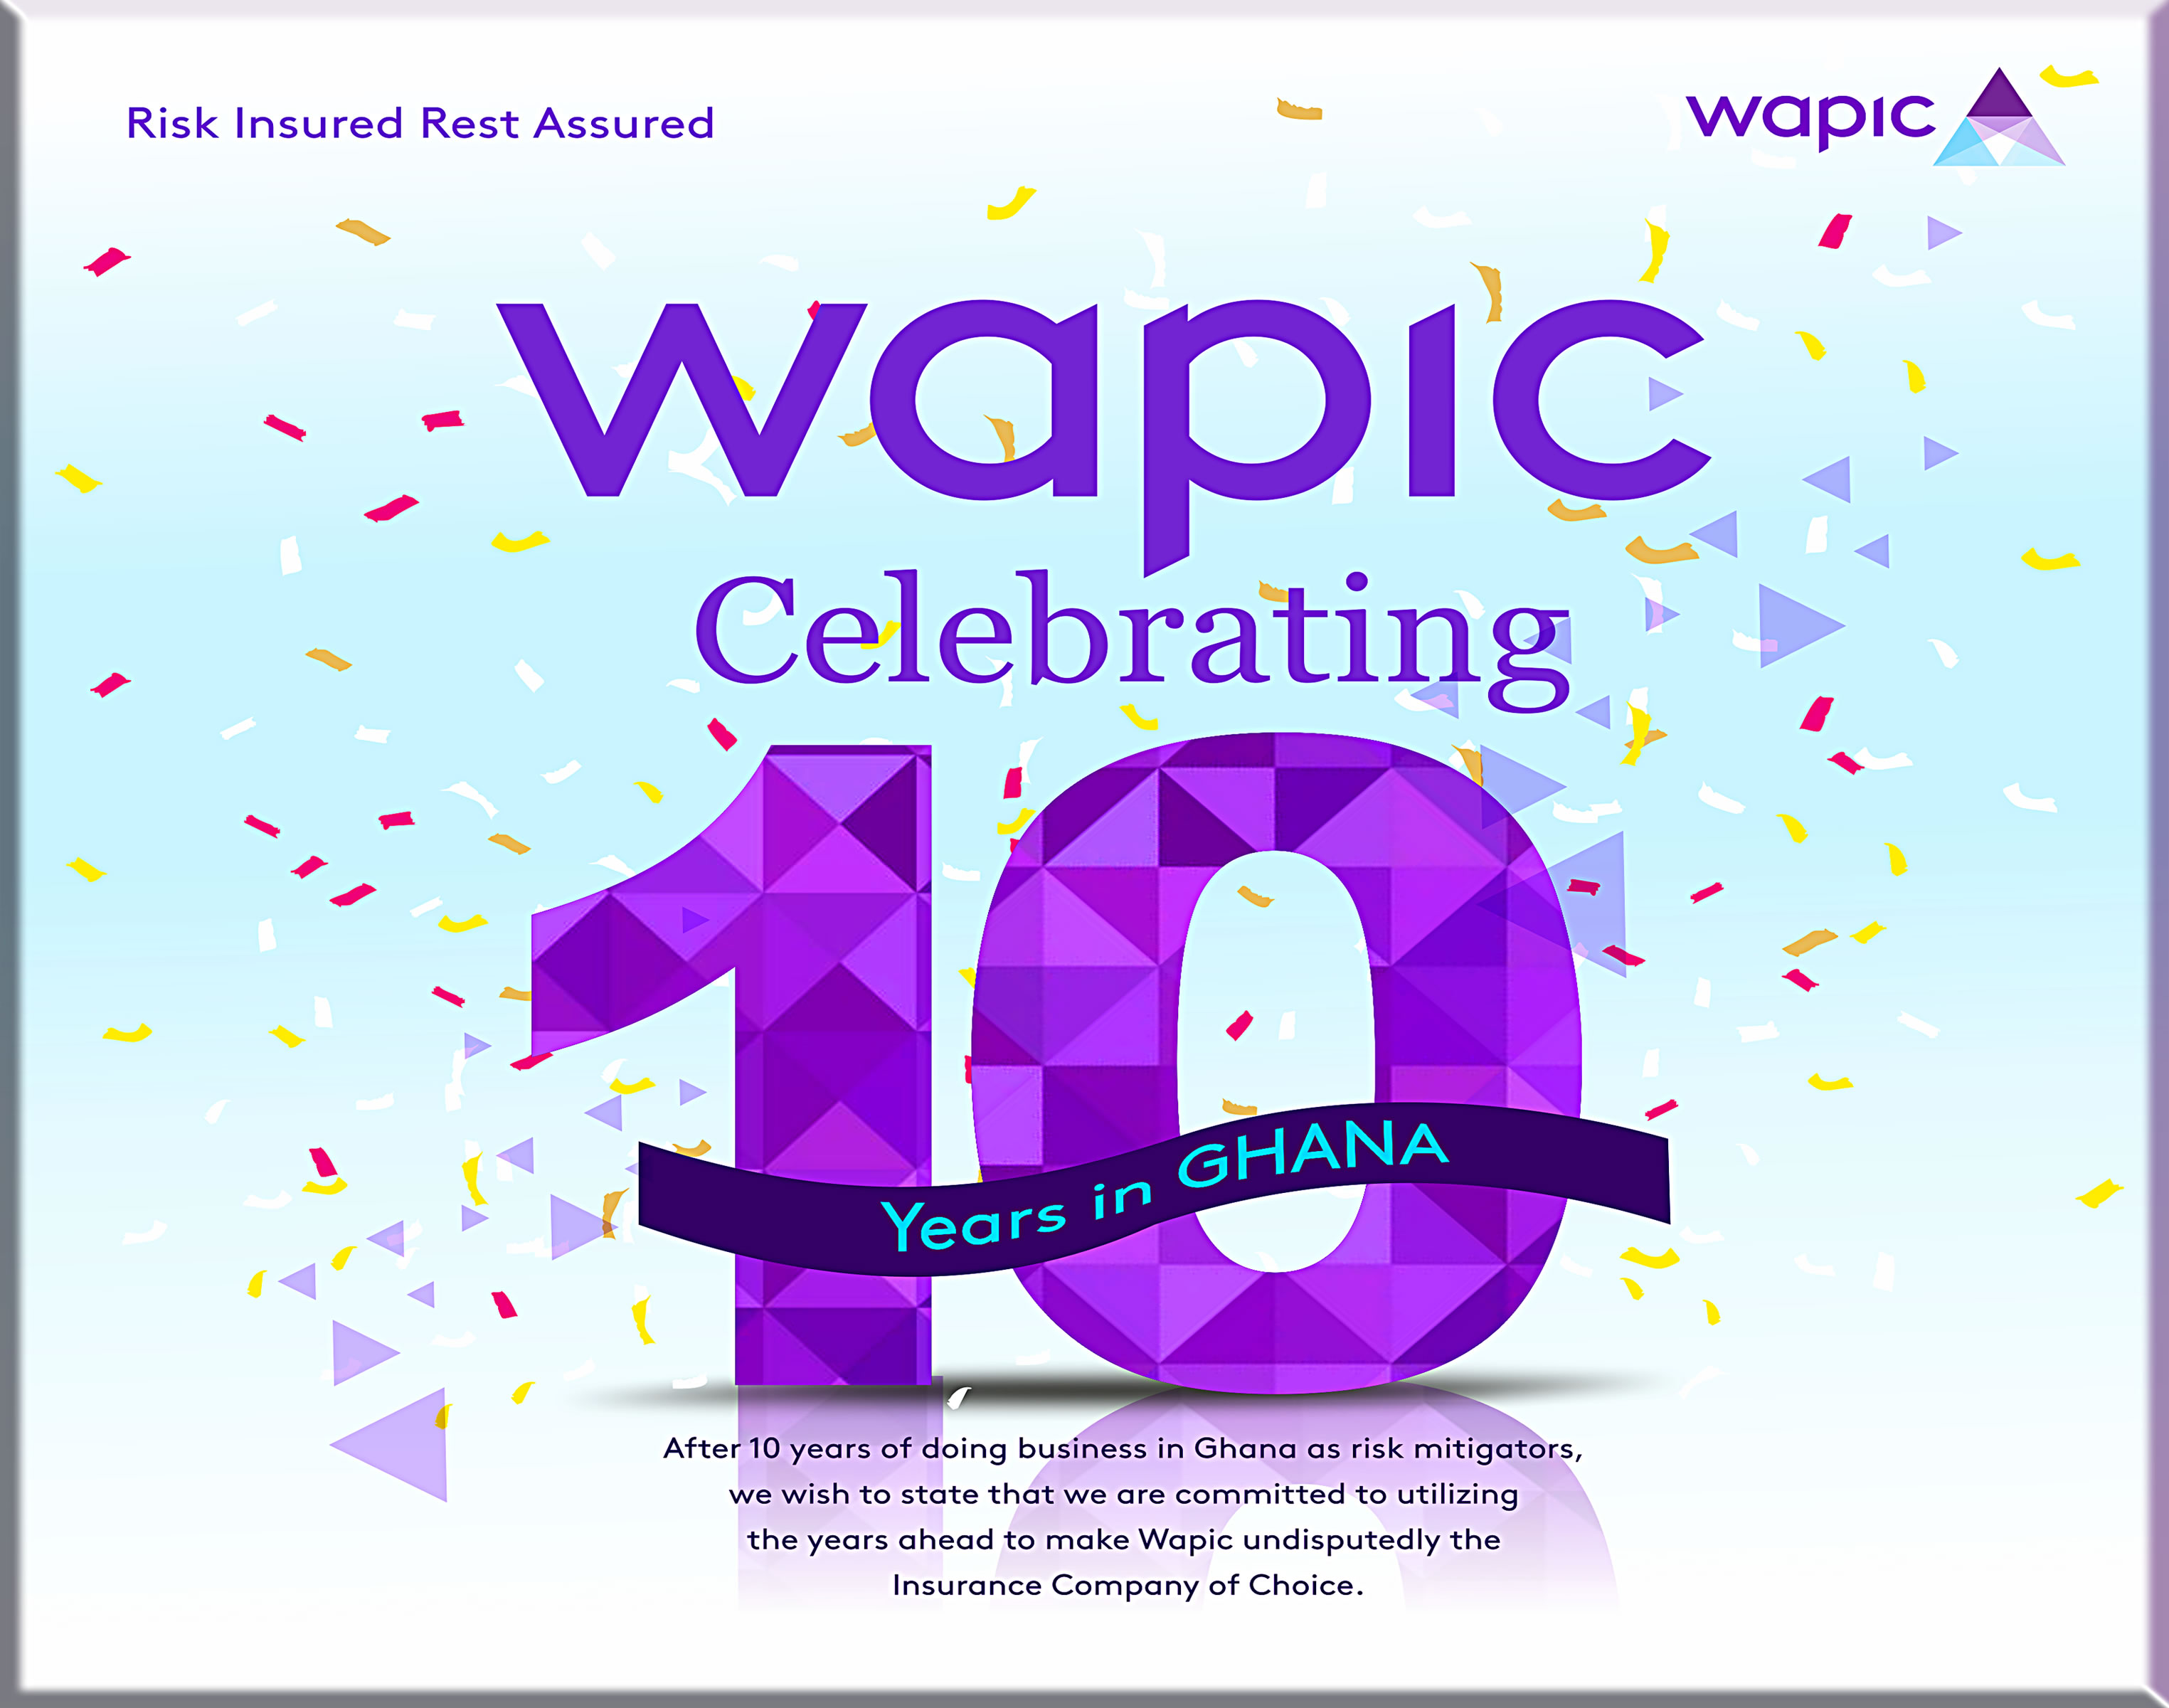 Hurray! Wapic Insurance attains 10 years of business operations in Ghana 